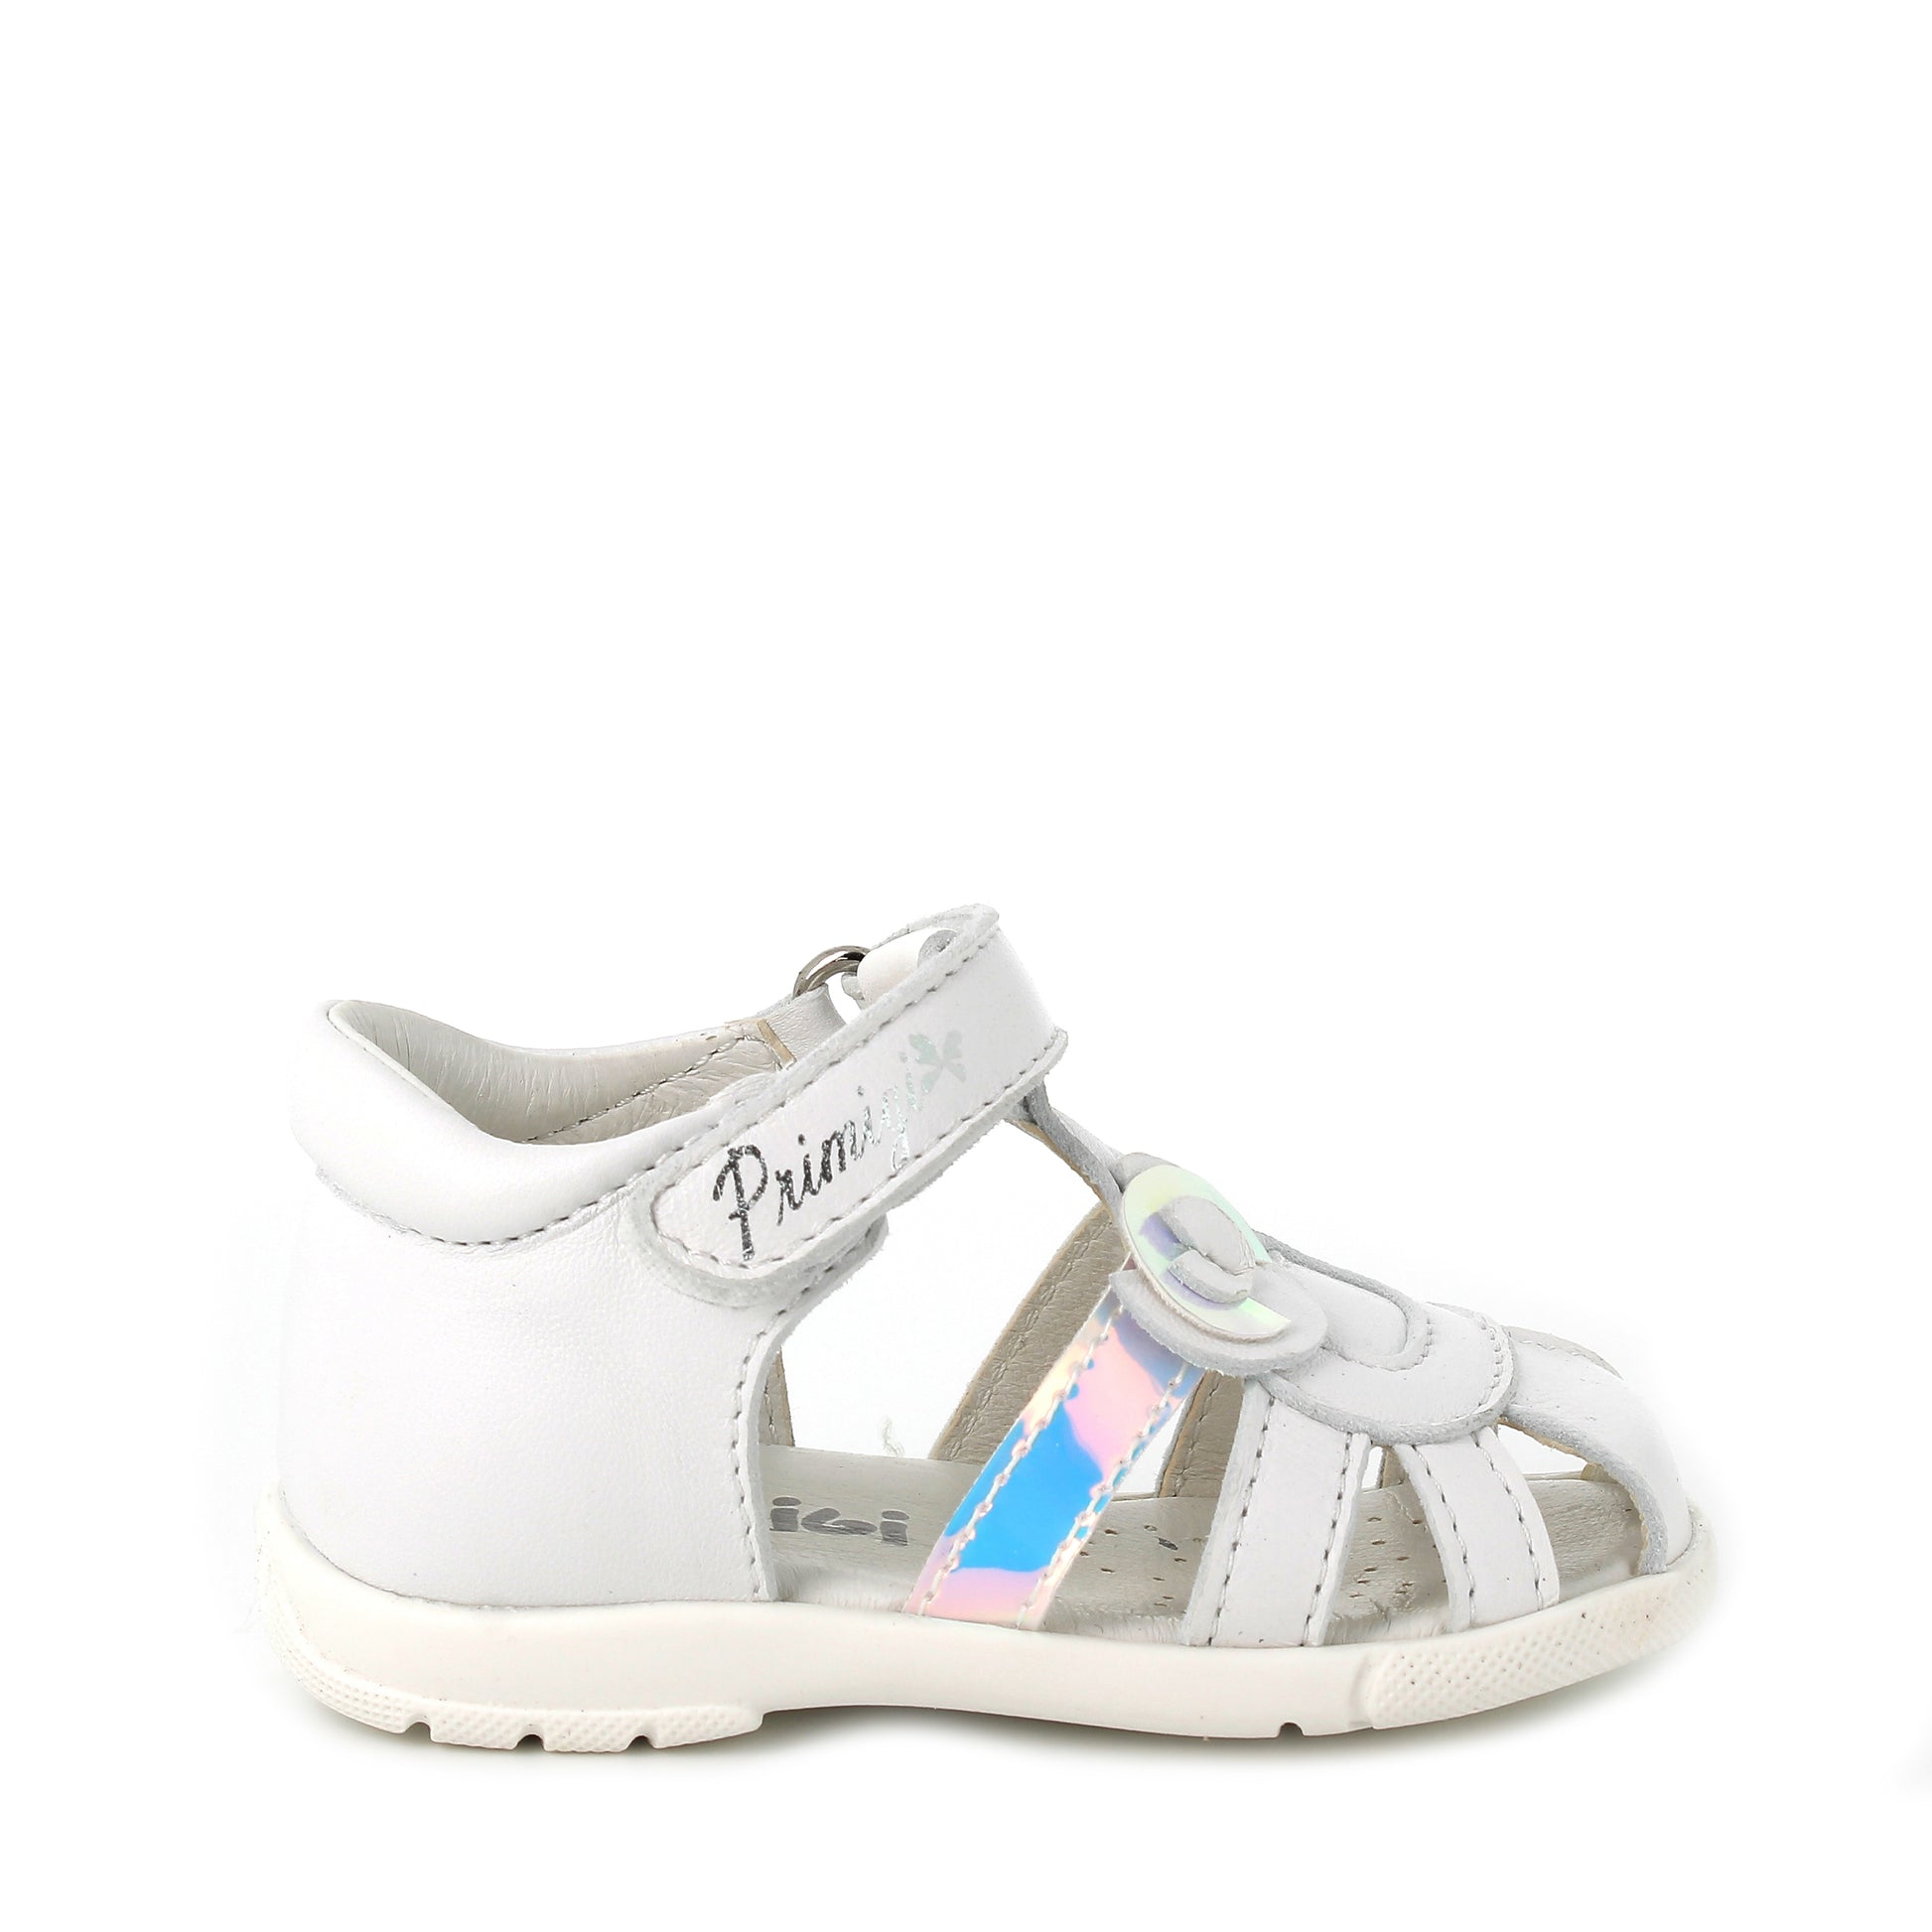 A girls closed toe sandal by Primigi, style 3906900 Baby, in white and silver leather with velcro fastening. Right side view.